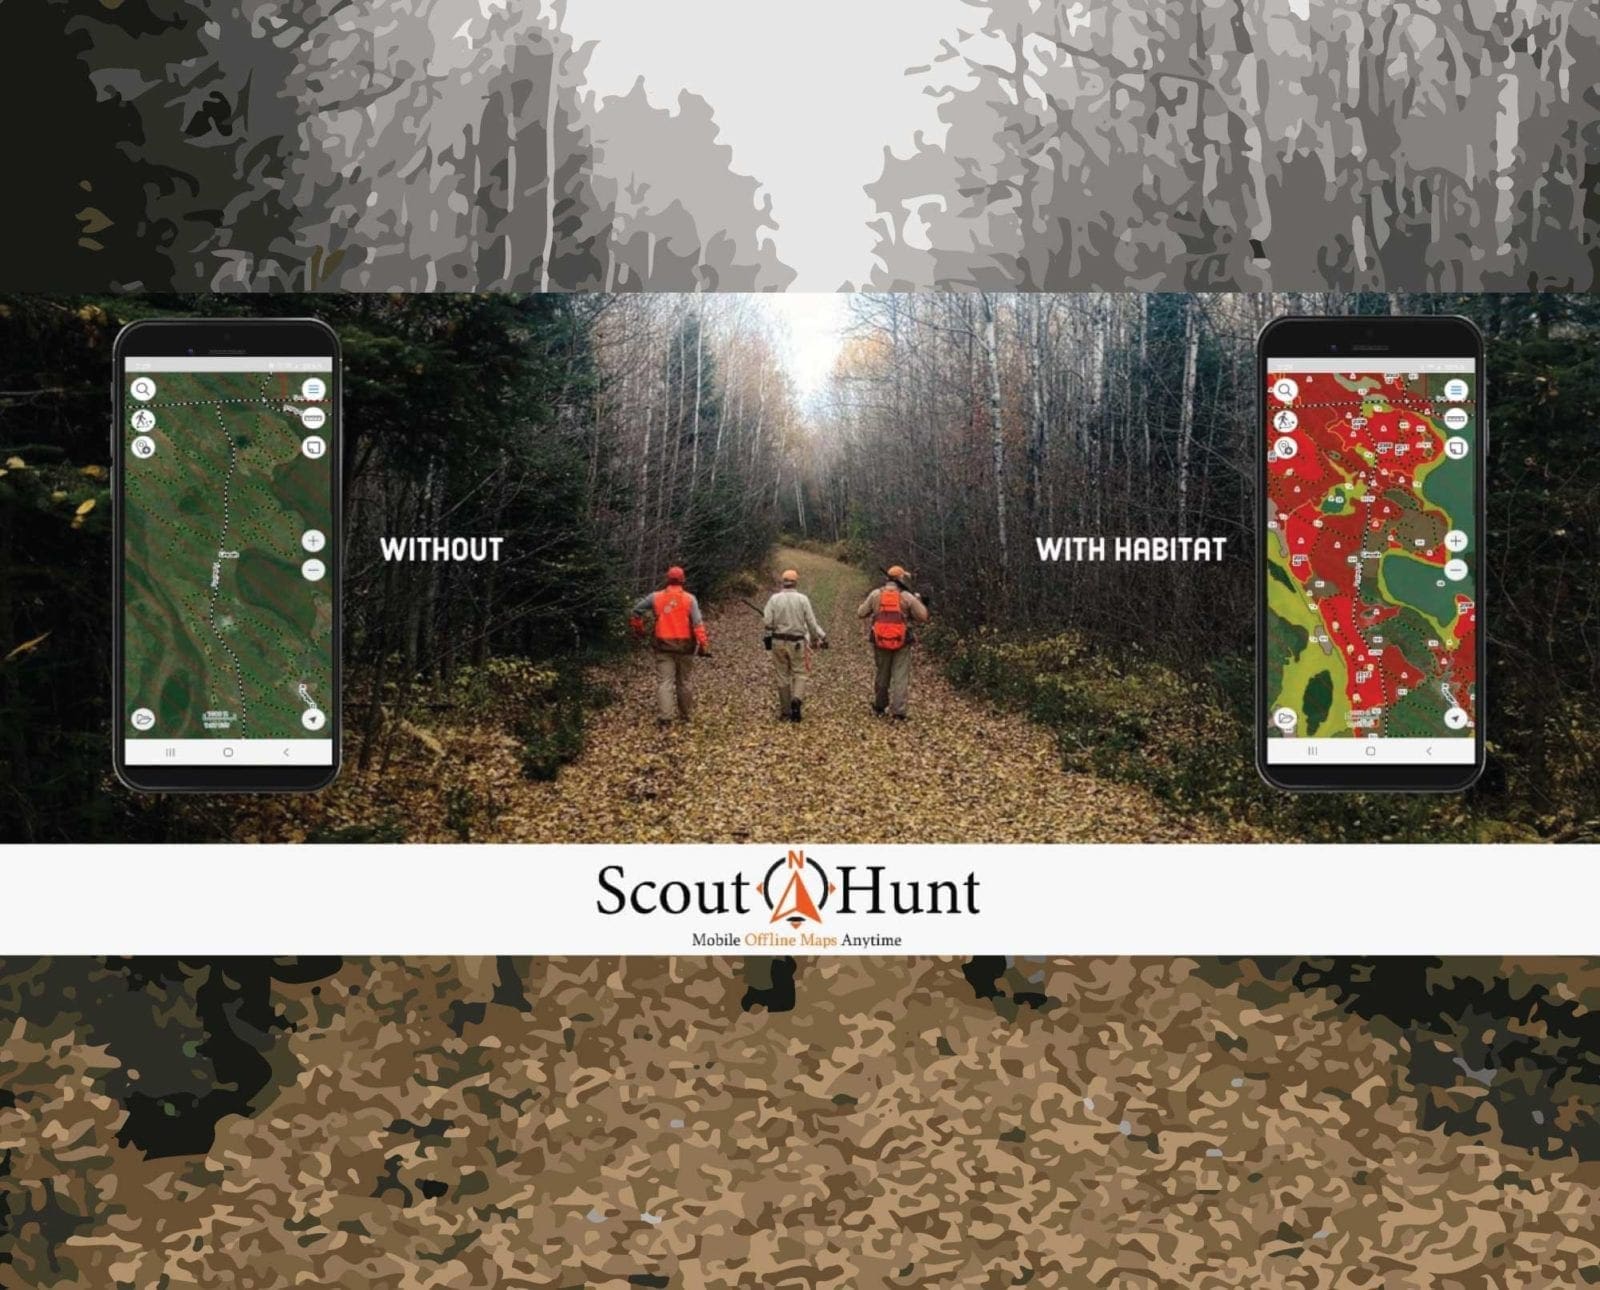 Hunters using Scout-N-Hunt mapping